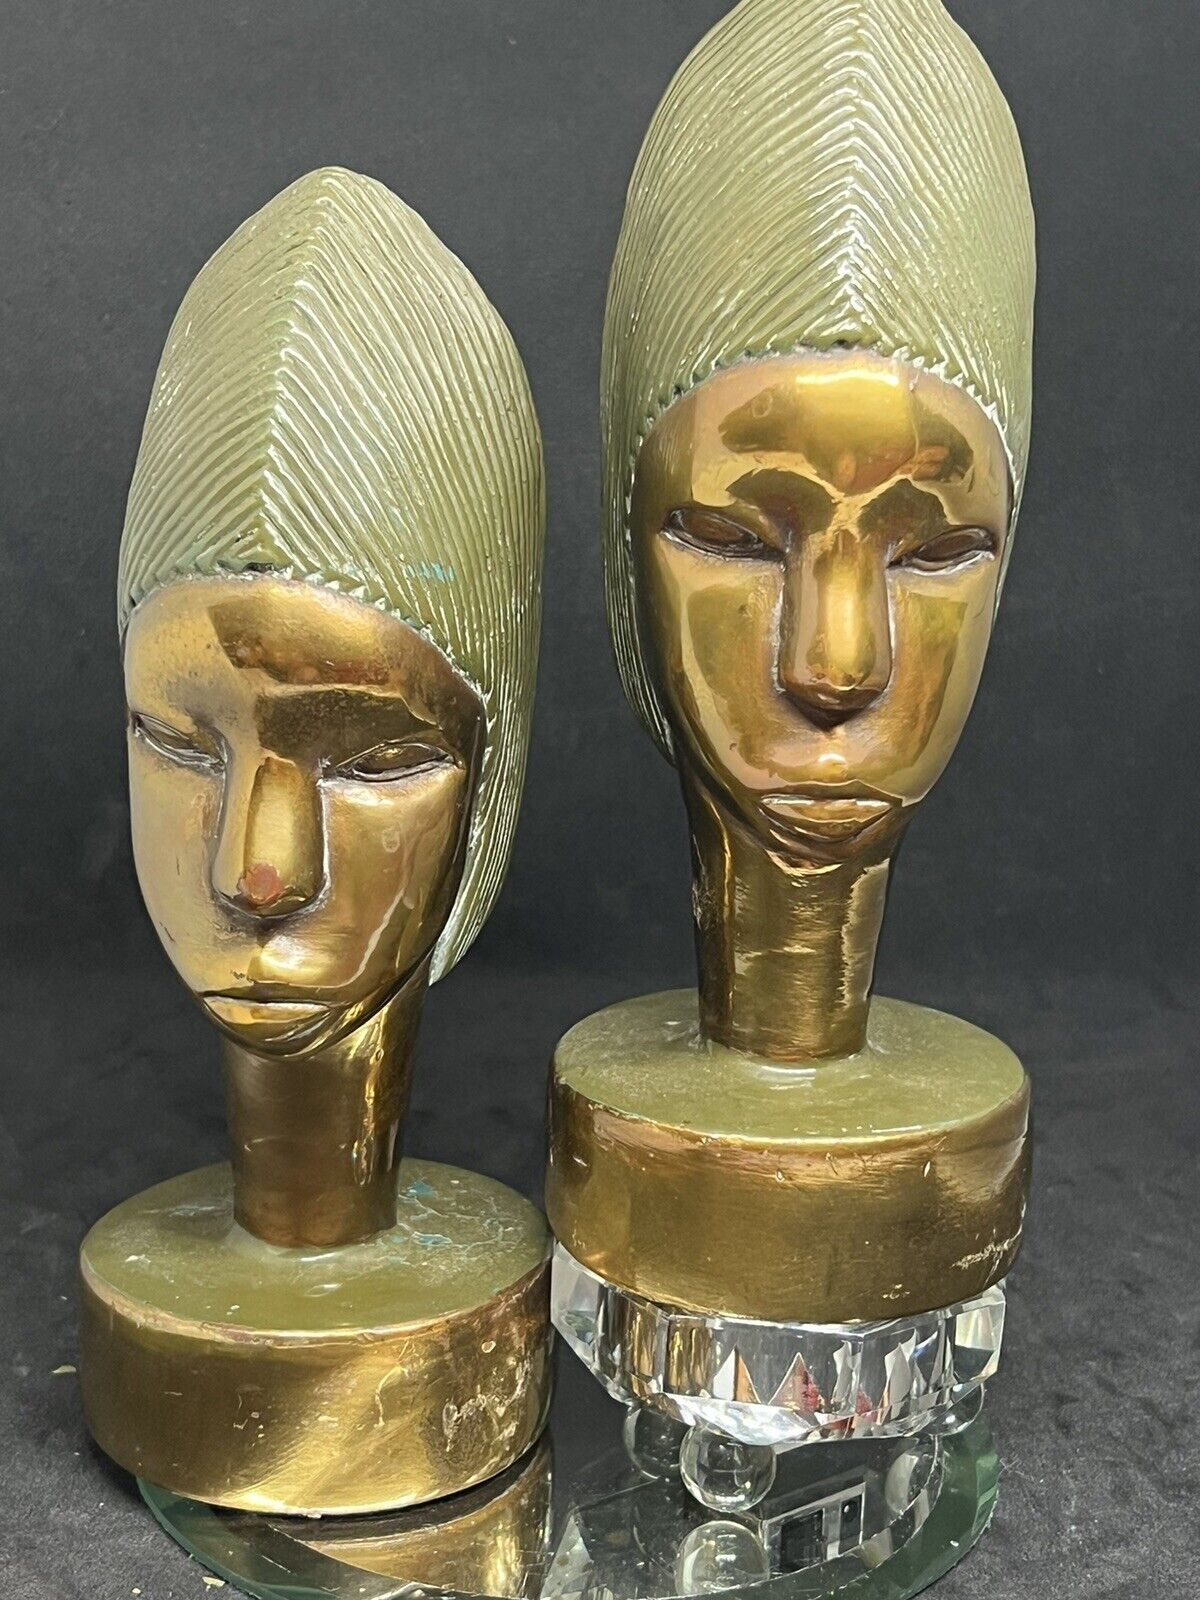 ANTIQUE MARION BRONZE CLAD USA NUBIAN TRIBE BLACK WOMAN LADY ART STATUE BOOKENDS